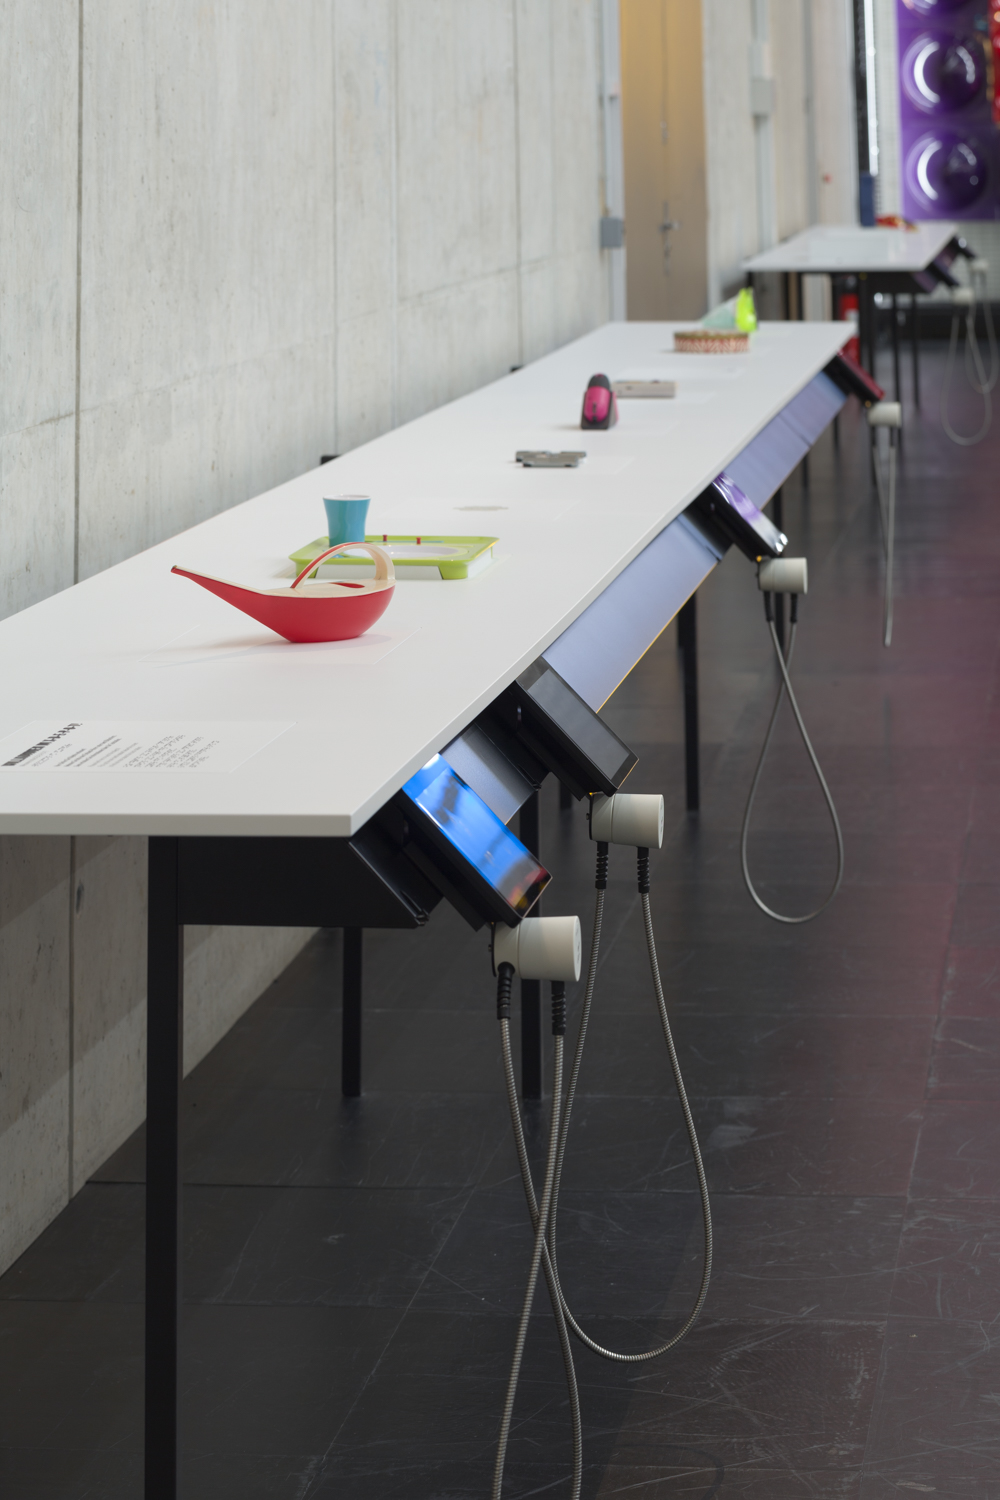 Picture in portrait format, view of the two touch tables with screens on a black rail. The table top is white. Several colourful tactile objects are attached. A watering can can be seen at the front.